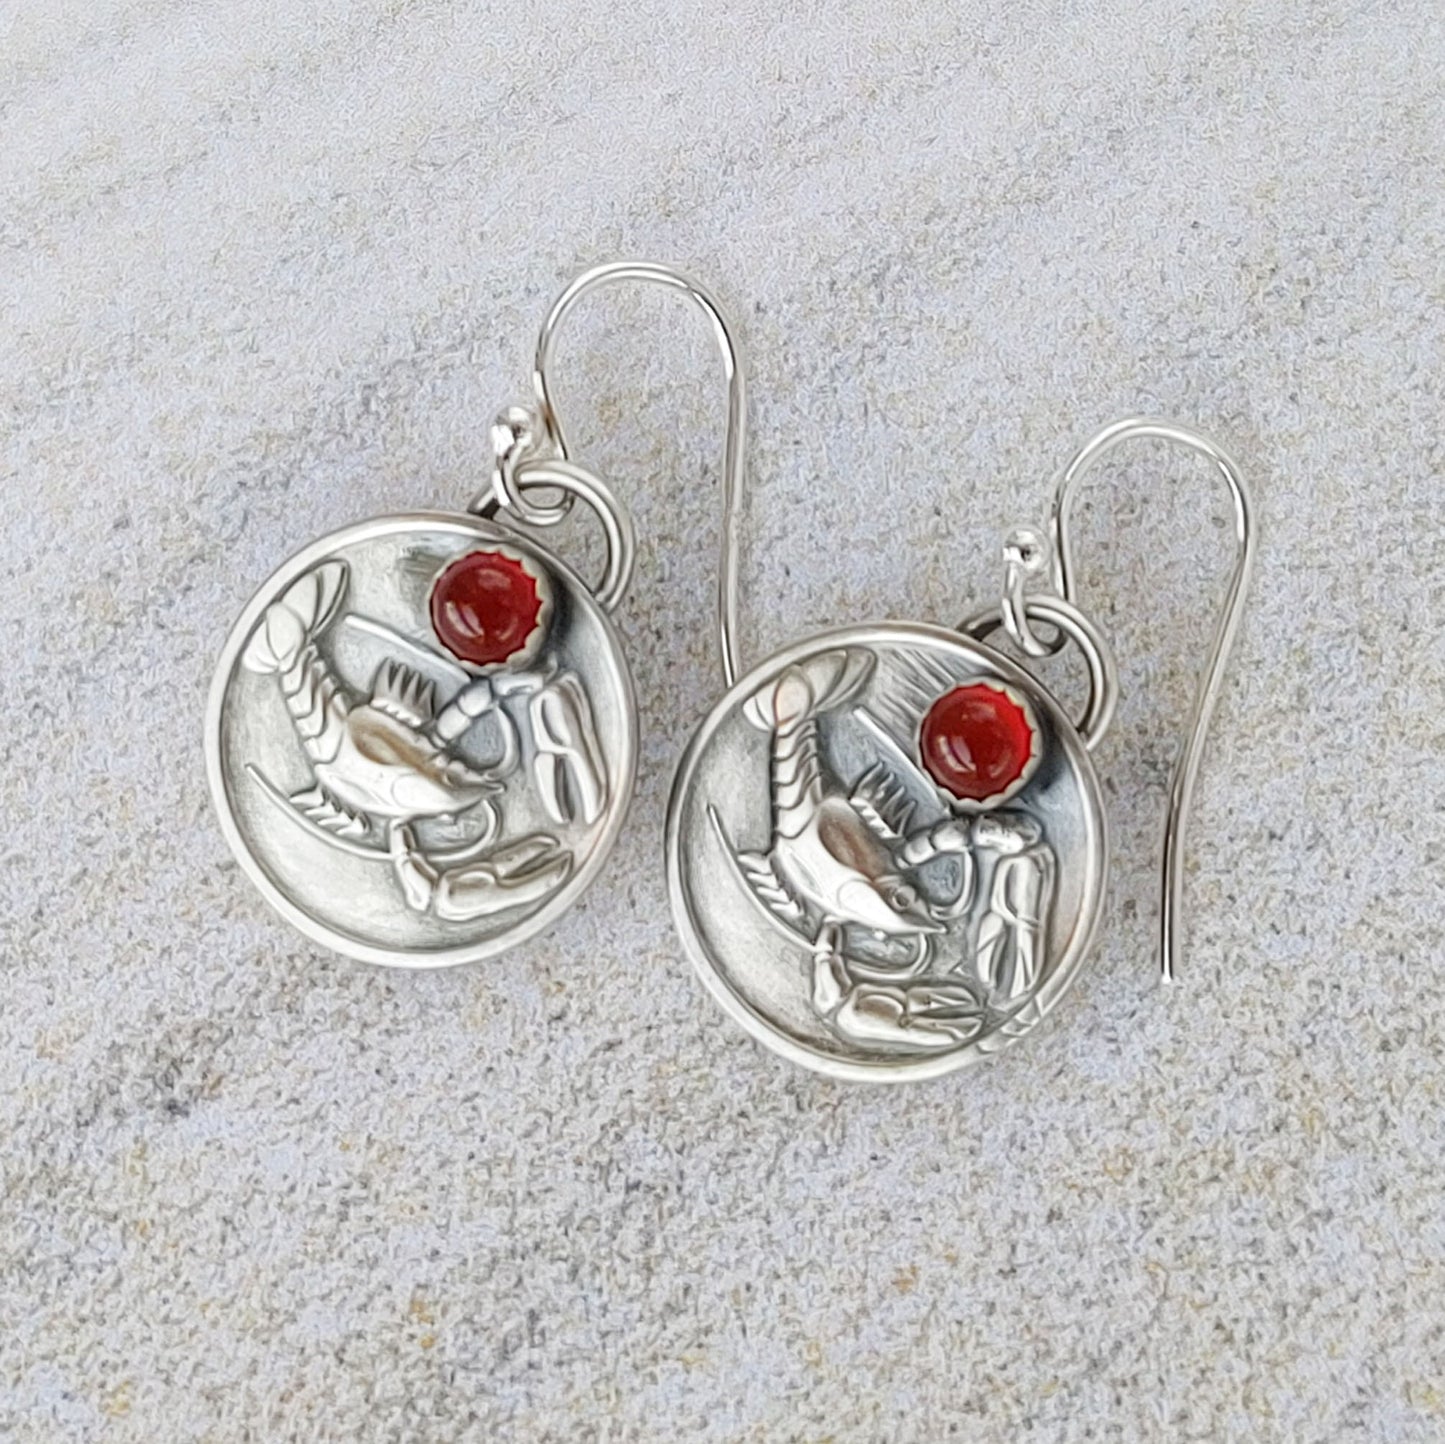 Round Lobster or Crayfish Earrings with Gemstones